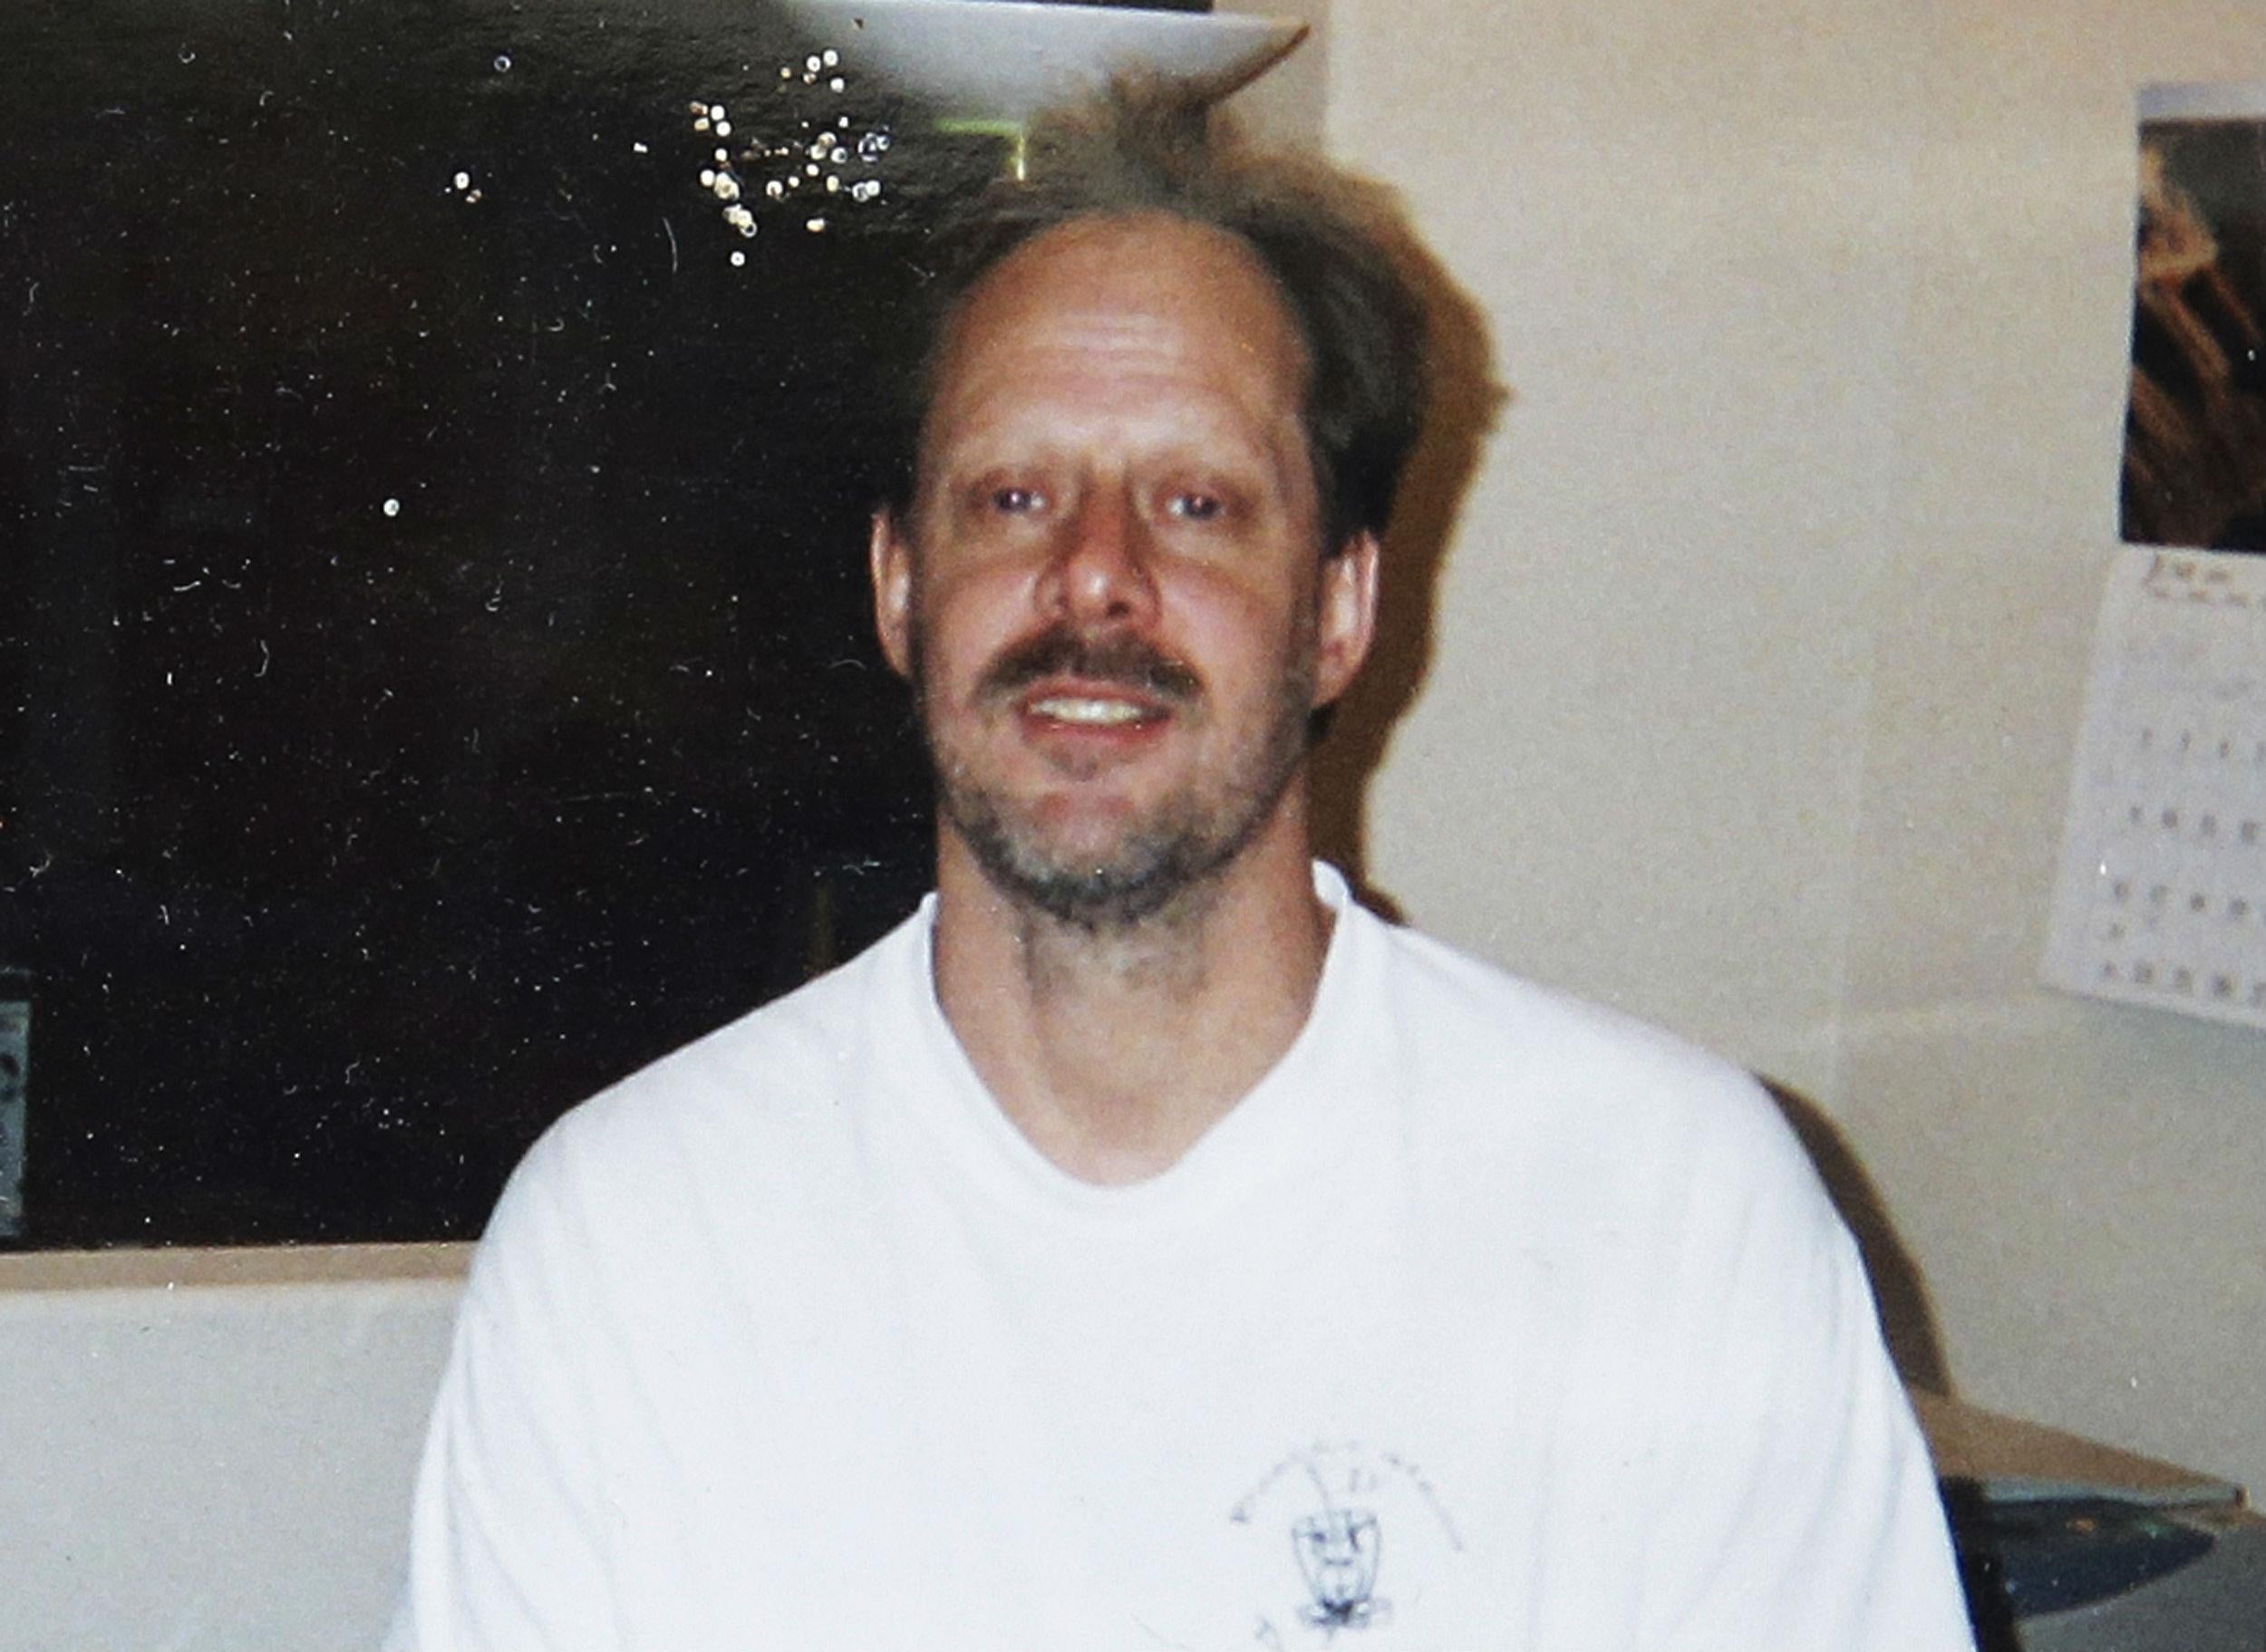 Stephen Paddock shot dead 58 revellers at a concert in Las Vegas on Sunday